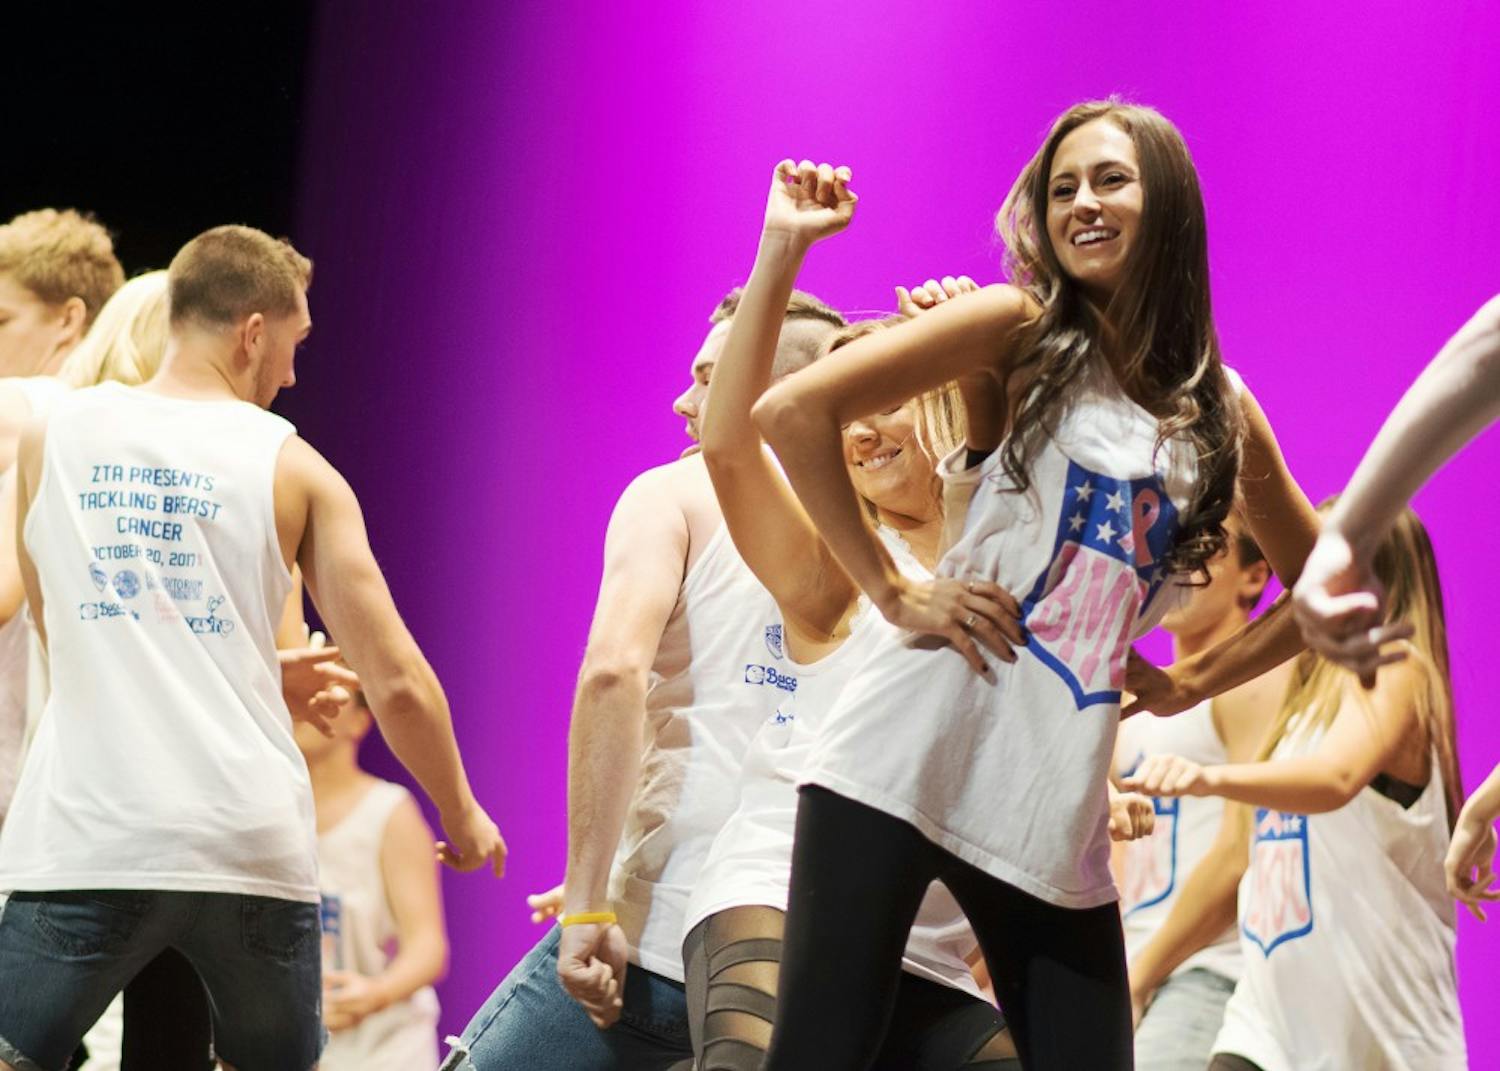 Members of greek life dance on stage Friday night at the Auditorium to kick off Zeta Tau Alpha's Big Man on Campus talent show. The sorority raised $182,116.13 for breast cancer research and awareness through programming like Big Man on Campus.